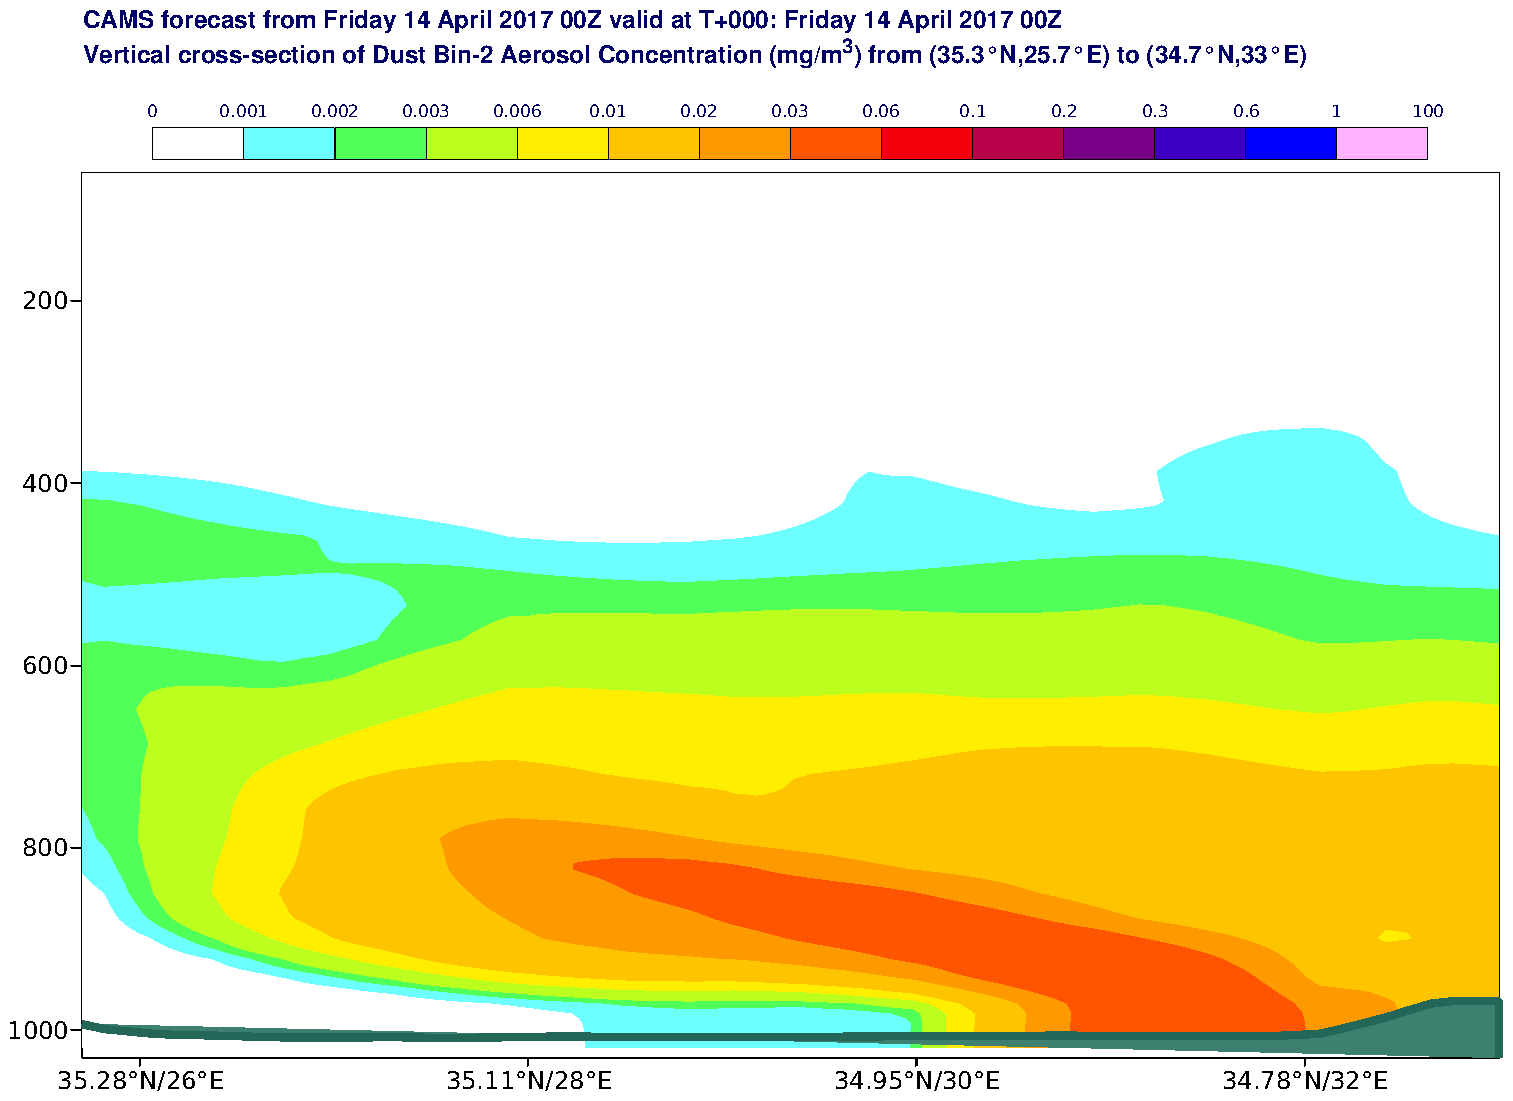 Vertical cross-section of Dust Bin-2 Aerosol Concentration (mg/m3) valid at T0 - 2017-04-14 00:00